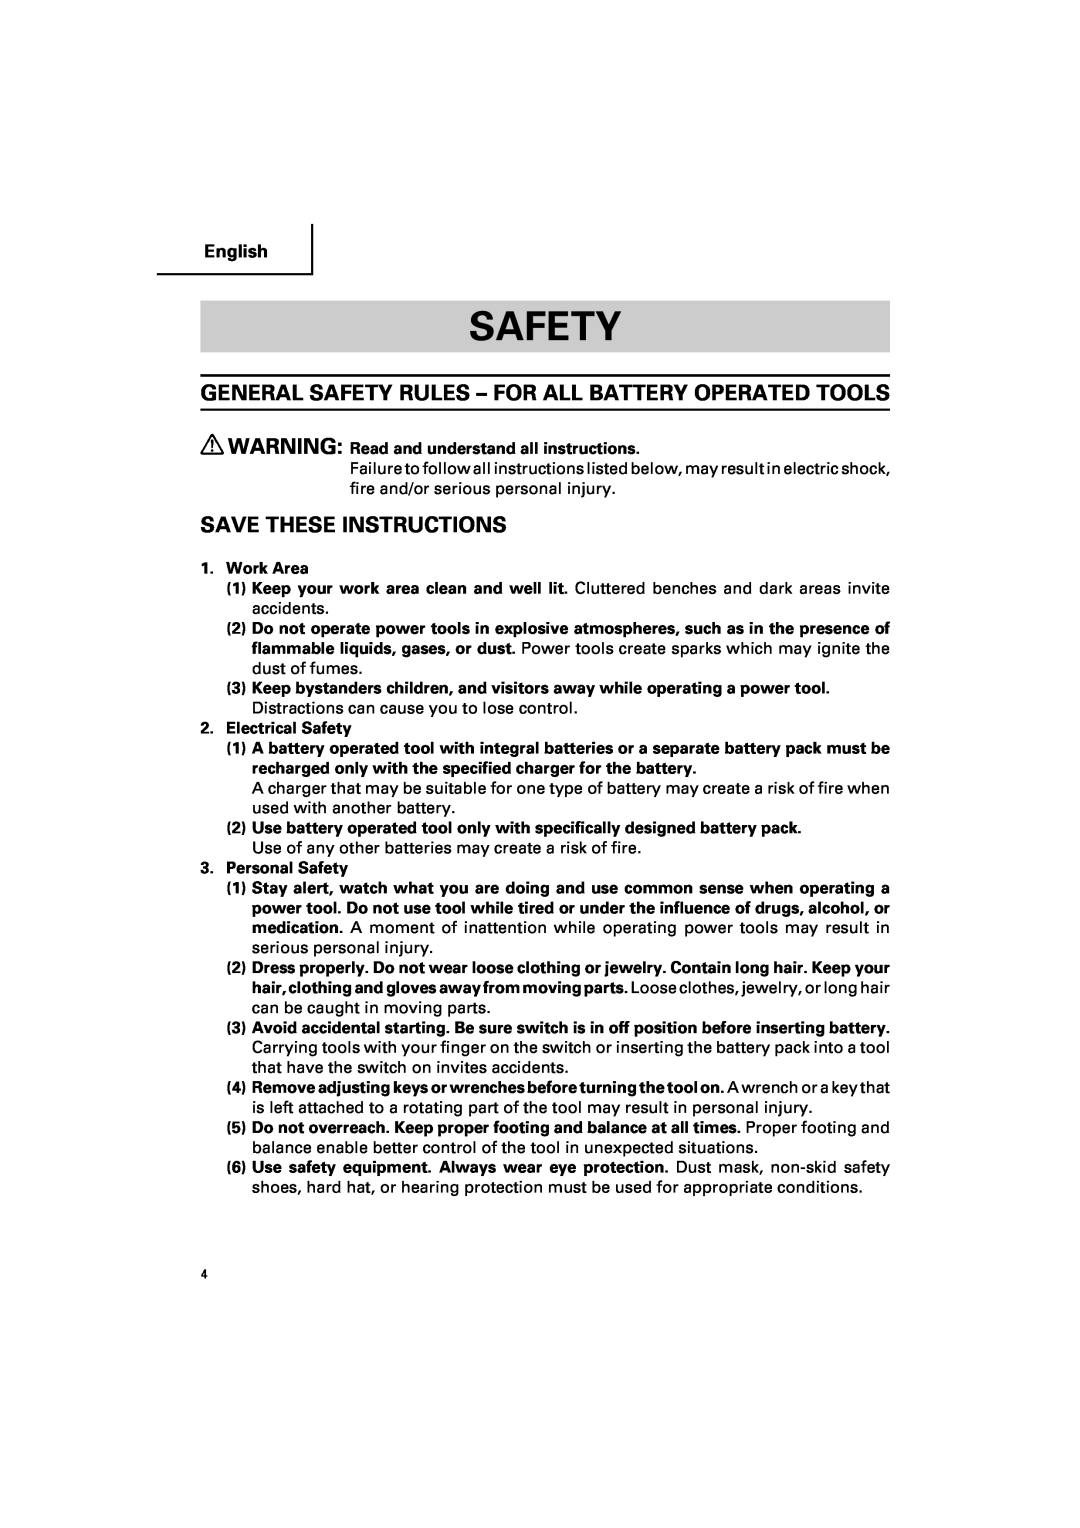 Hitachi DV 18DV, DV 14DV General Safety Rules - For All Battery Operated Tools, Save These Instructions, English 